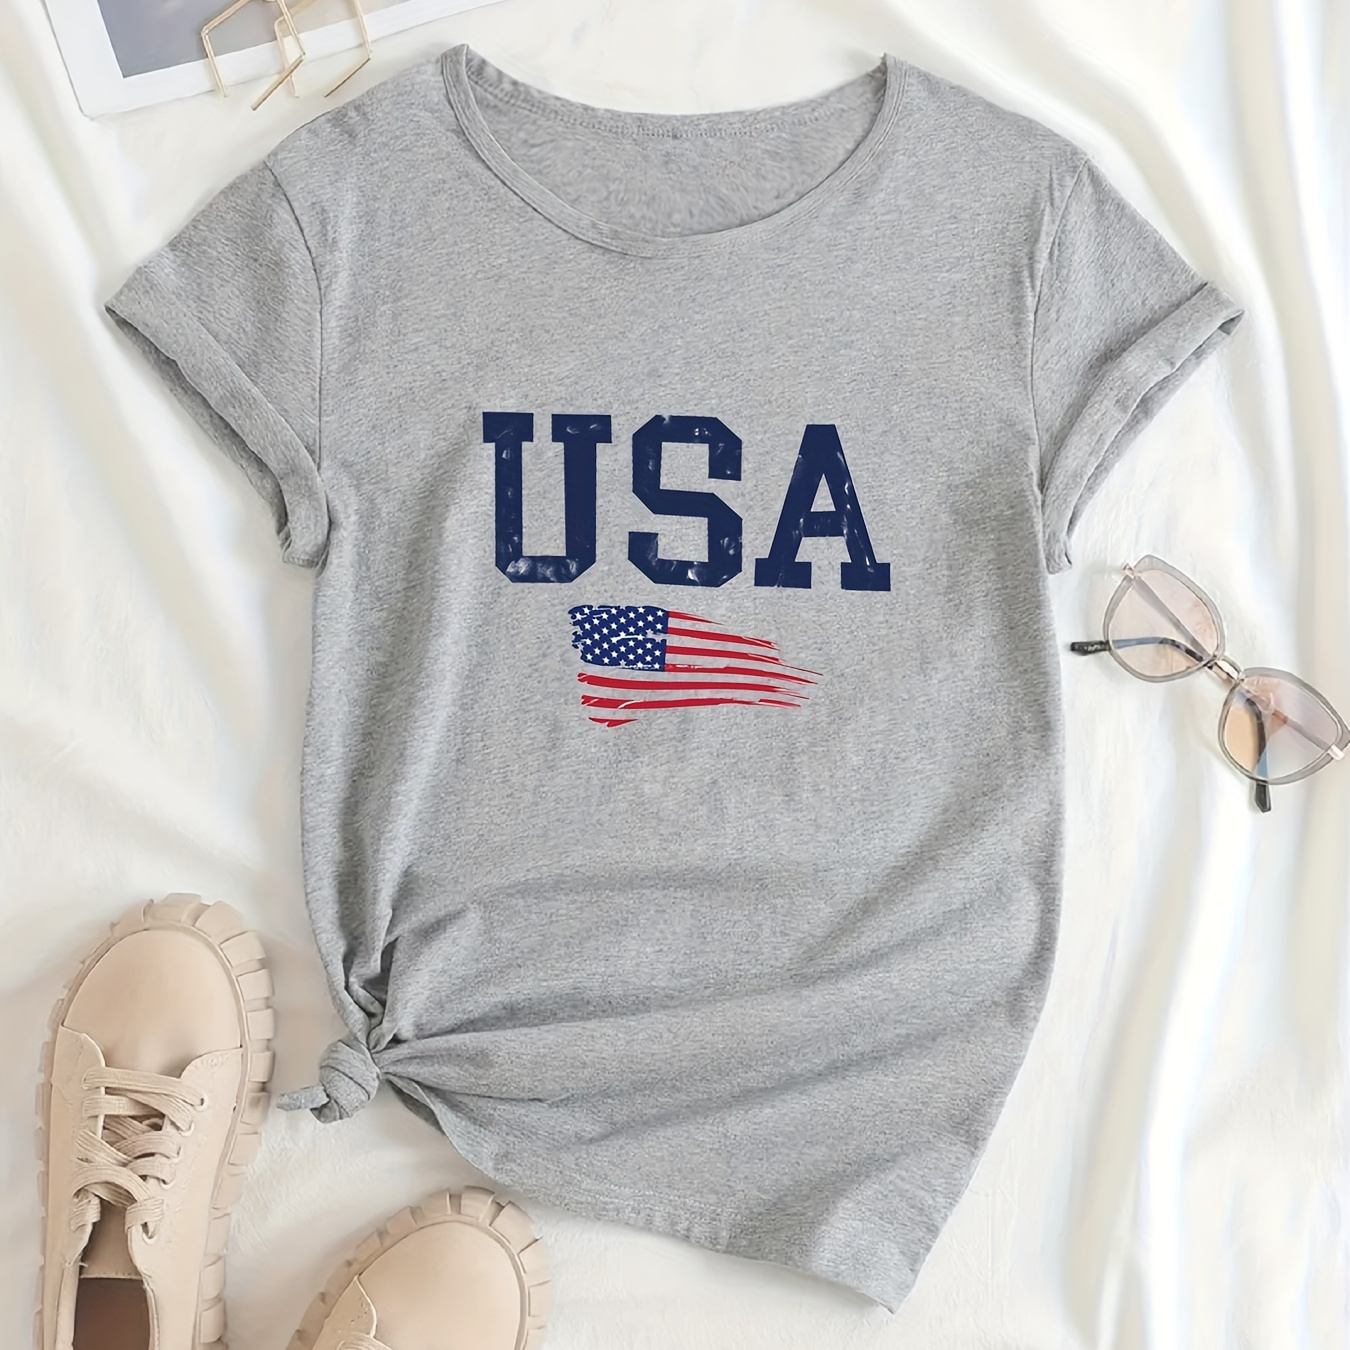 

American Flag Graphic Casual Sports T-shirts, Usa Letter Fashion Round Neck Short Sleeve Tops For Women, Women's Tops